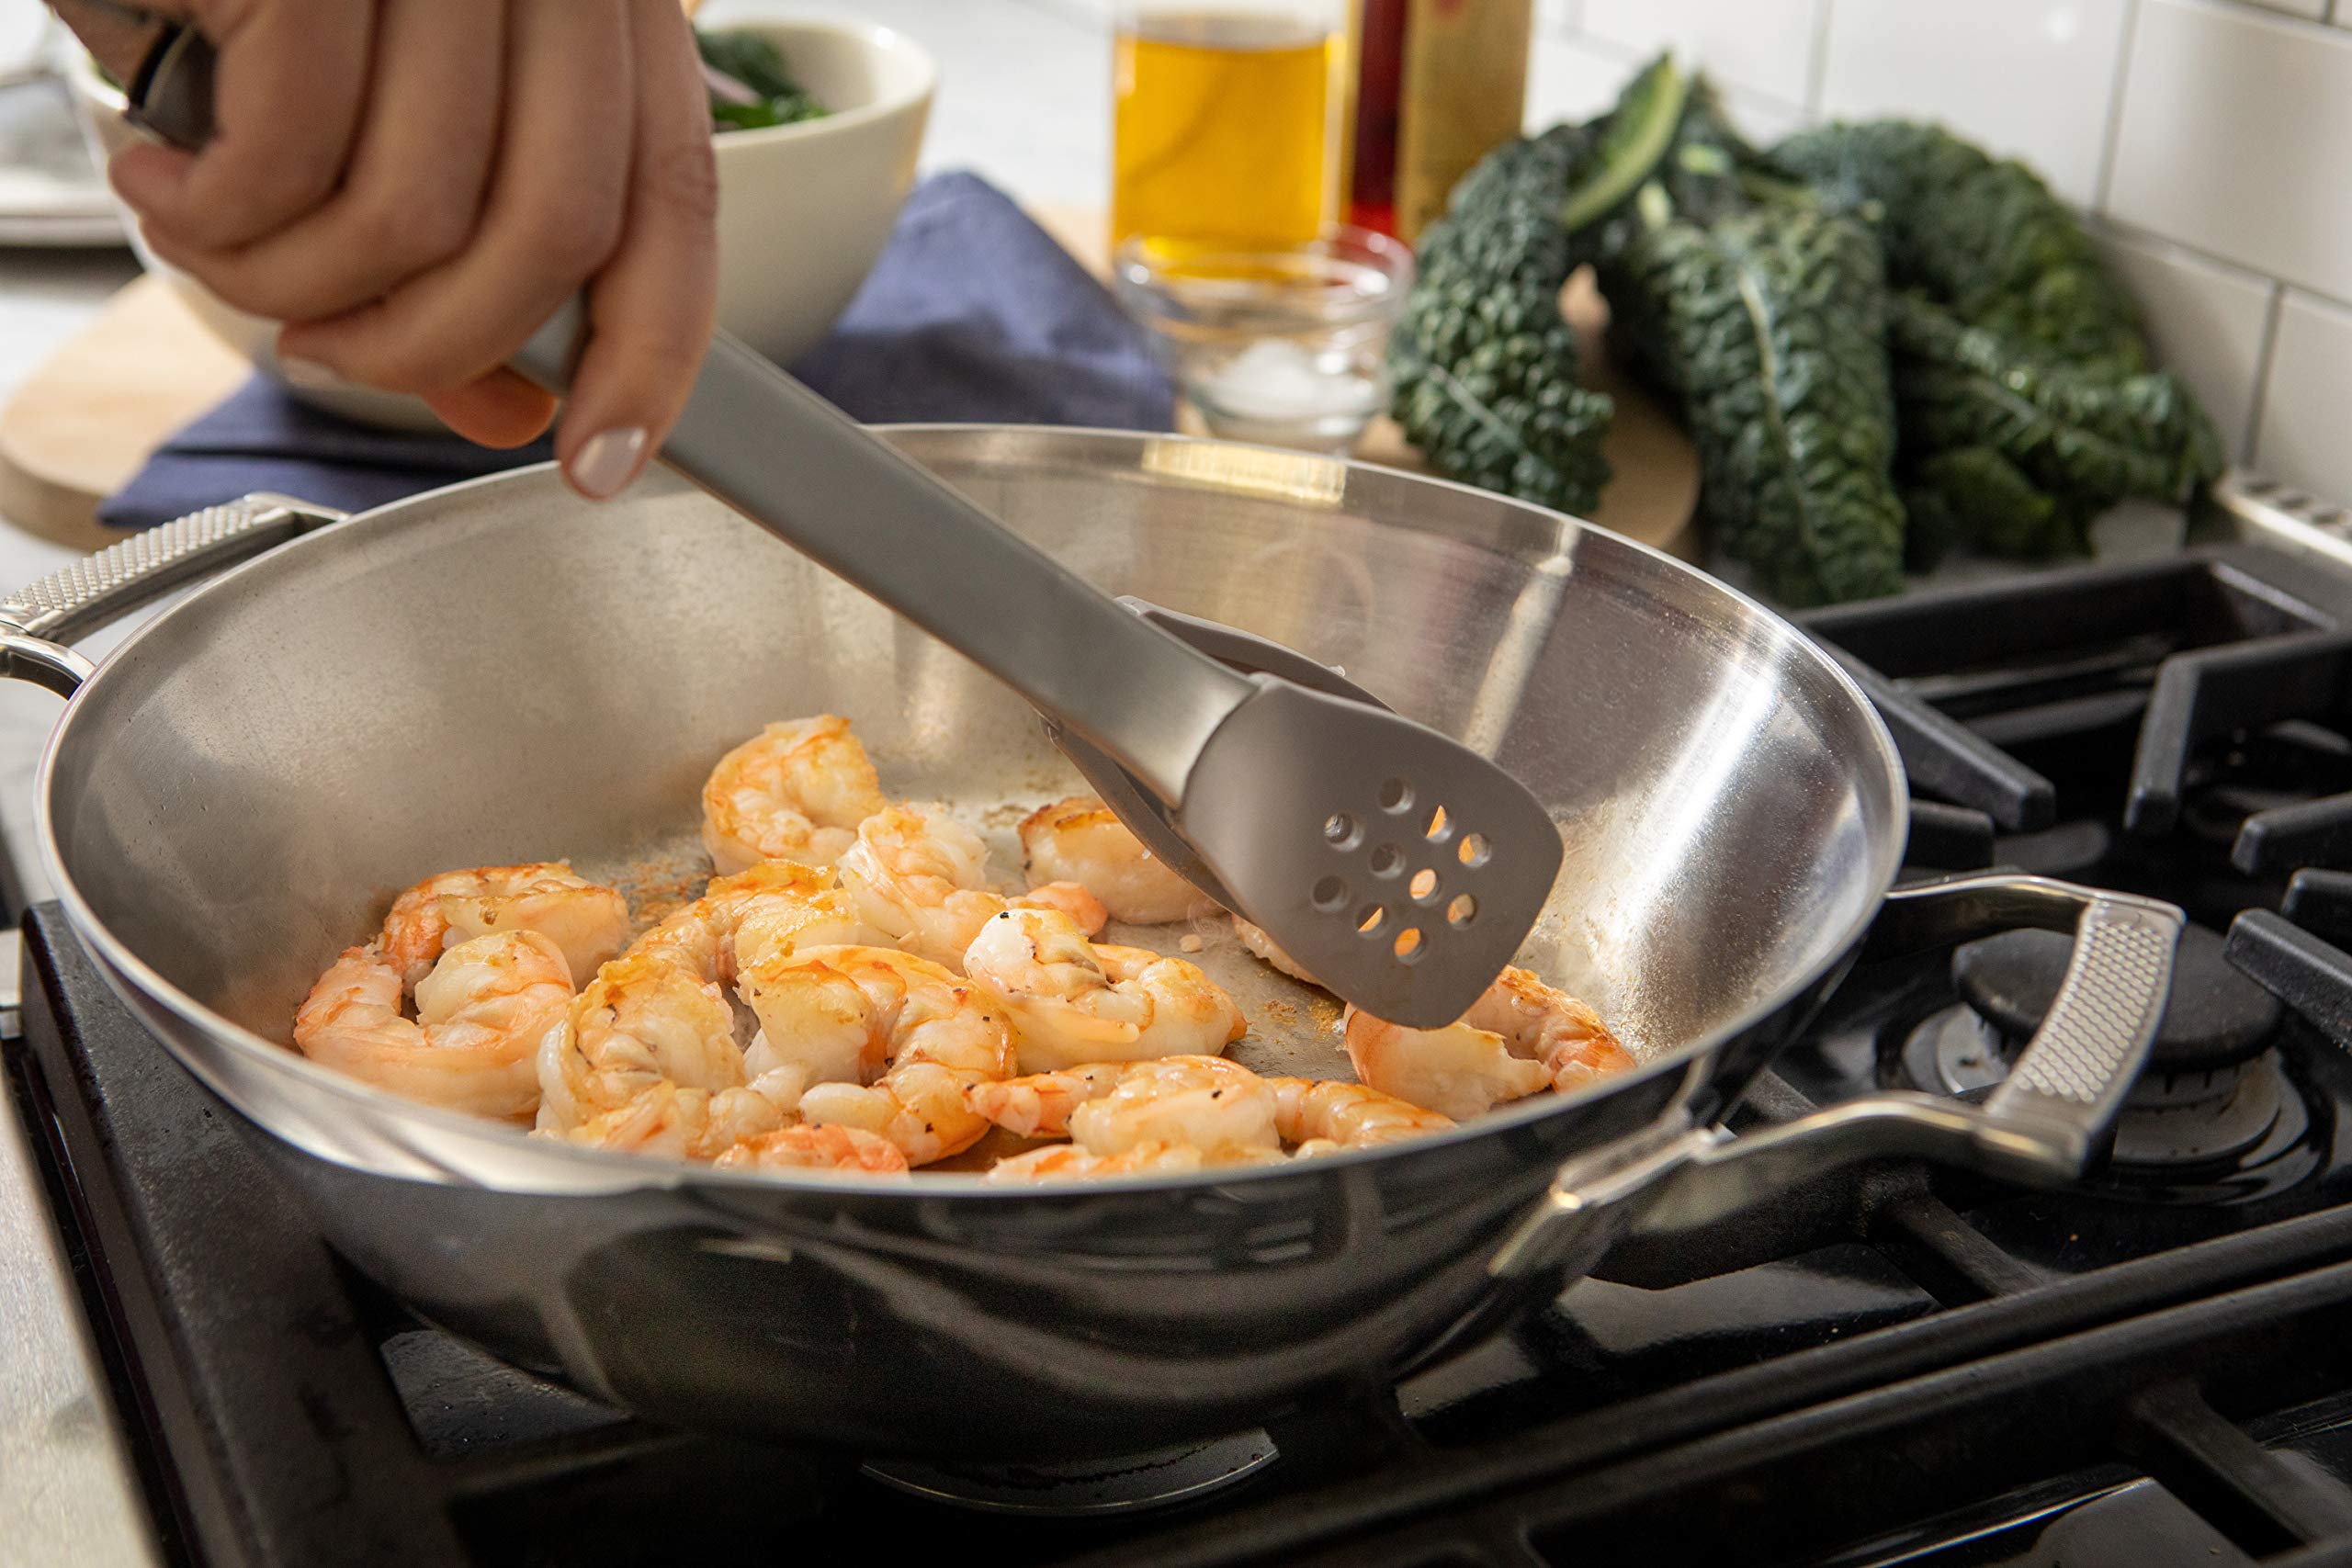 SAVEUR SELECTS Tri-ply Stainless Steel 12-Inch Everyday Pan with Lid, Induction-ready, Dishwasher Safe, Voyage Series